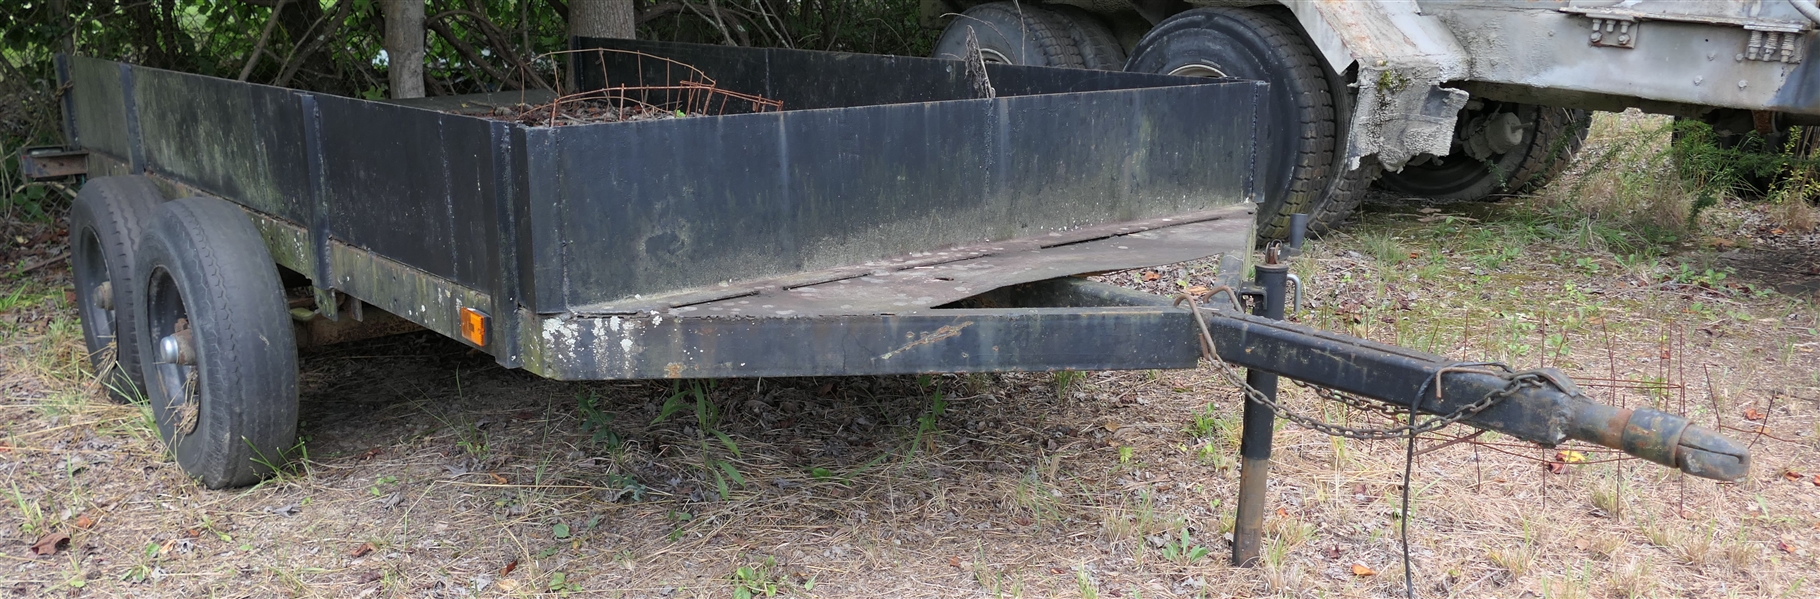 Dual Axle Trailer with Metal Bottom and Sides - All Steel - Measures  11 Feet Long 76" Wide